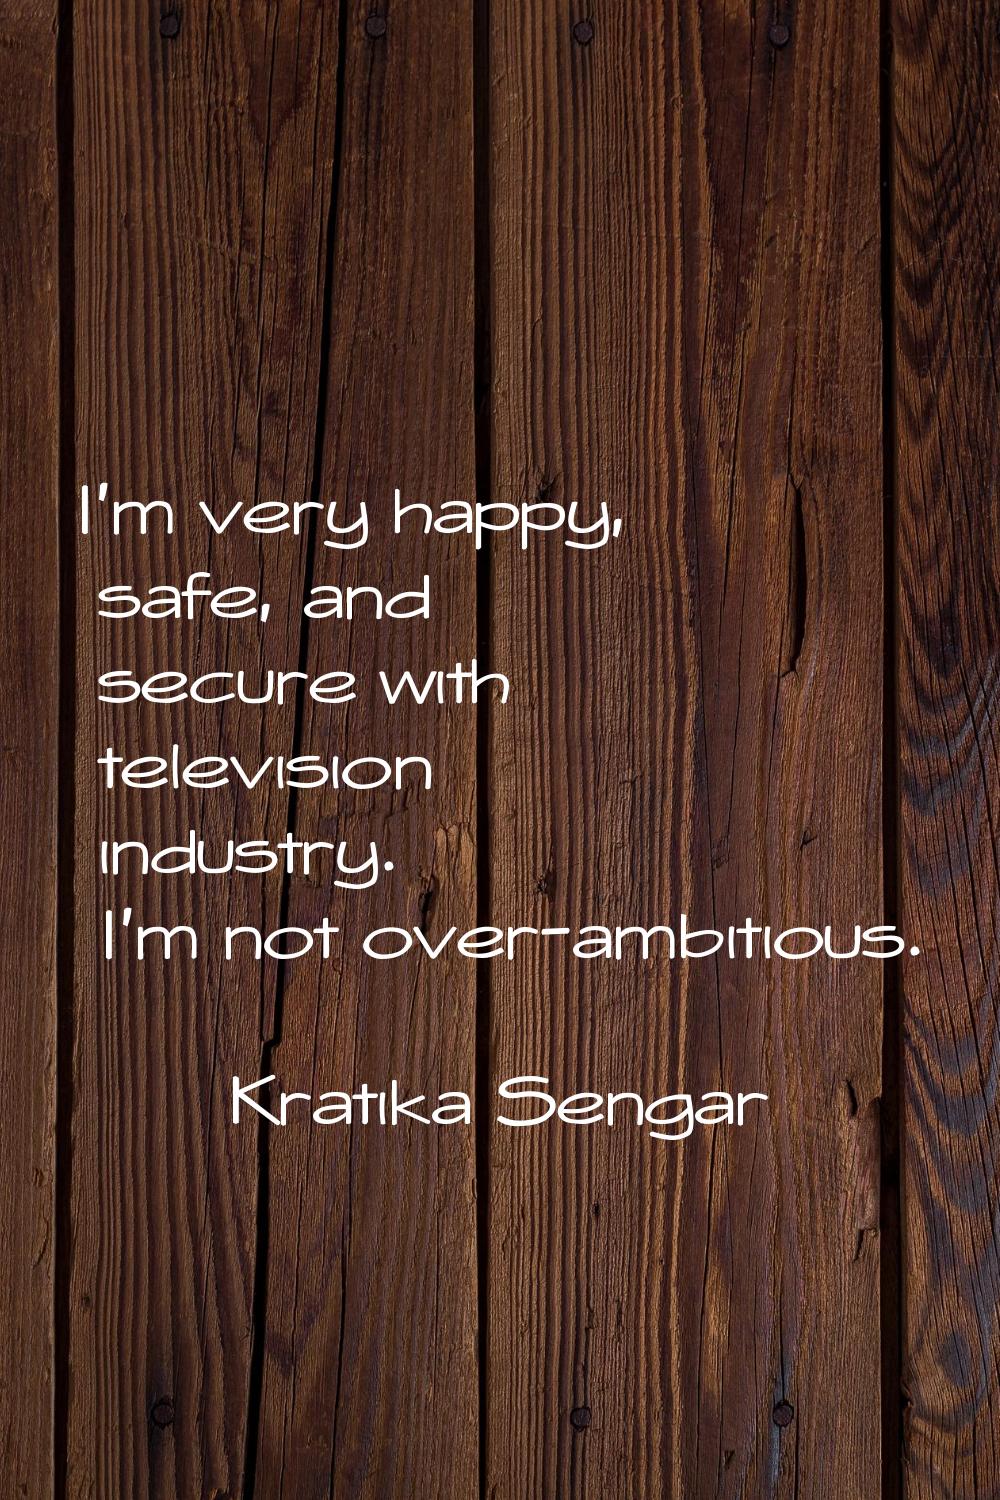 I'm very happy, safe, and secure with television industry. I'm not over-ambitious.